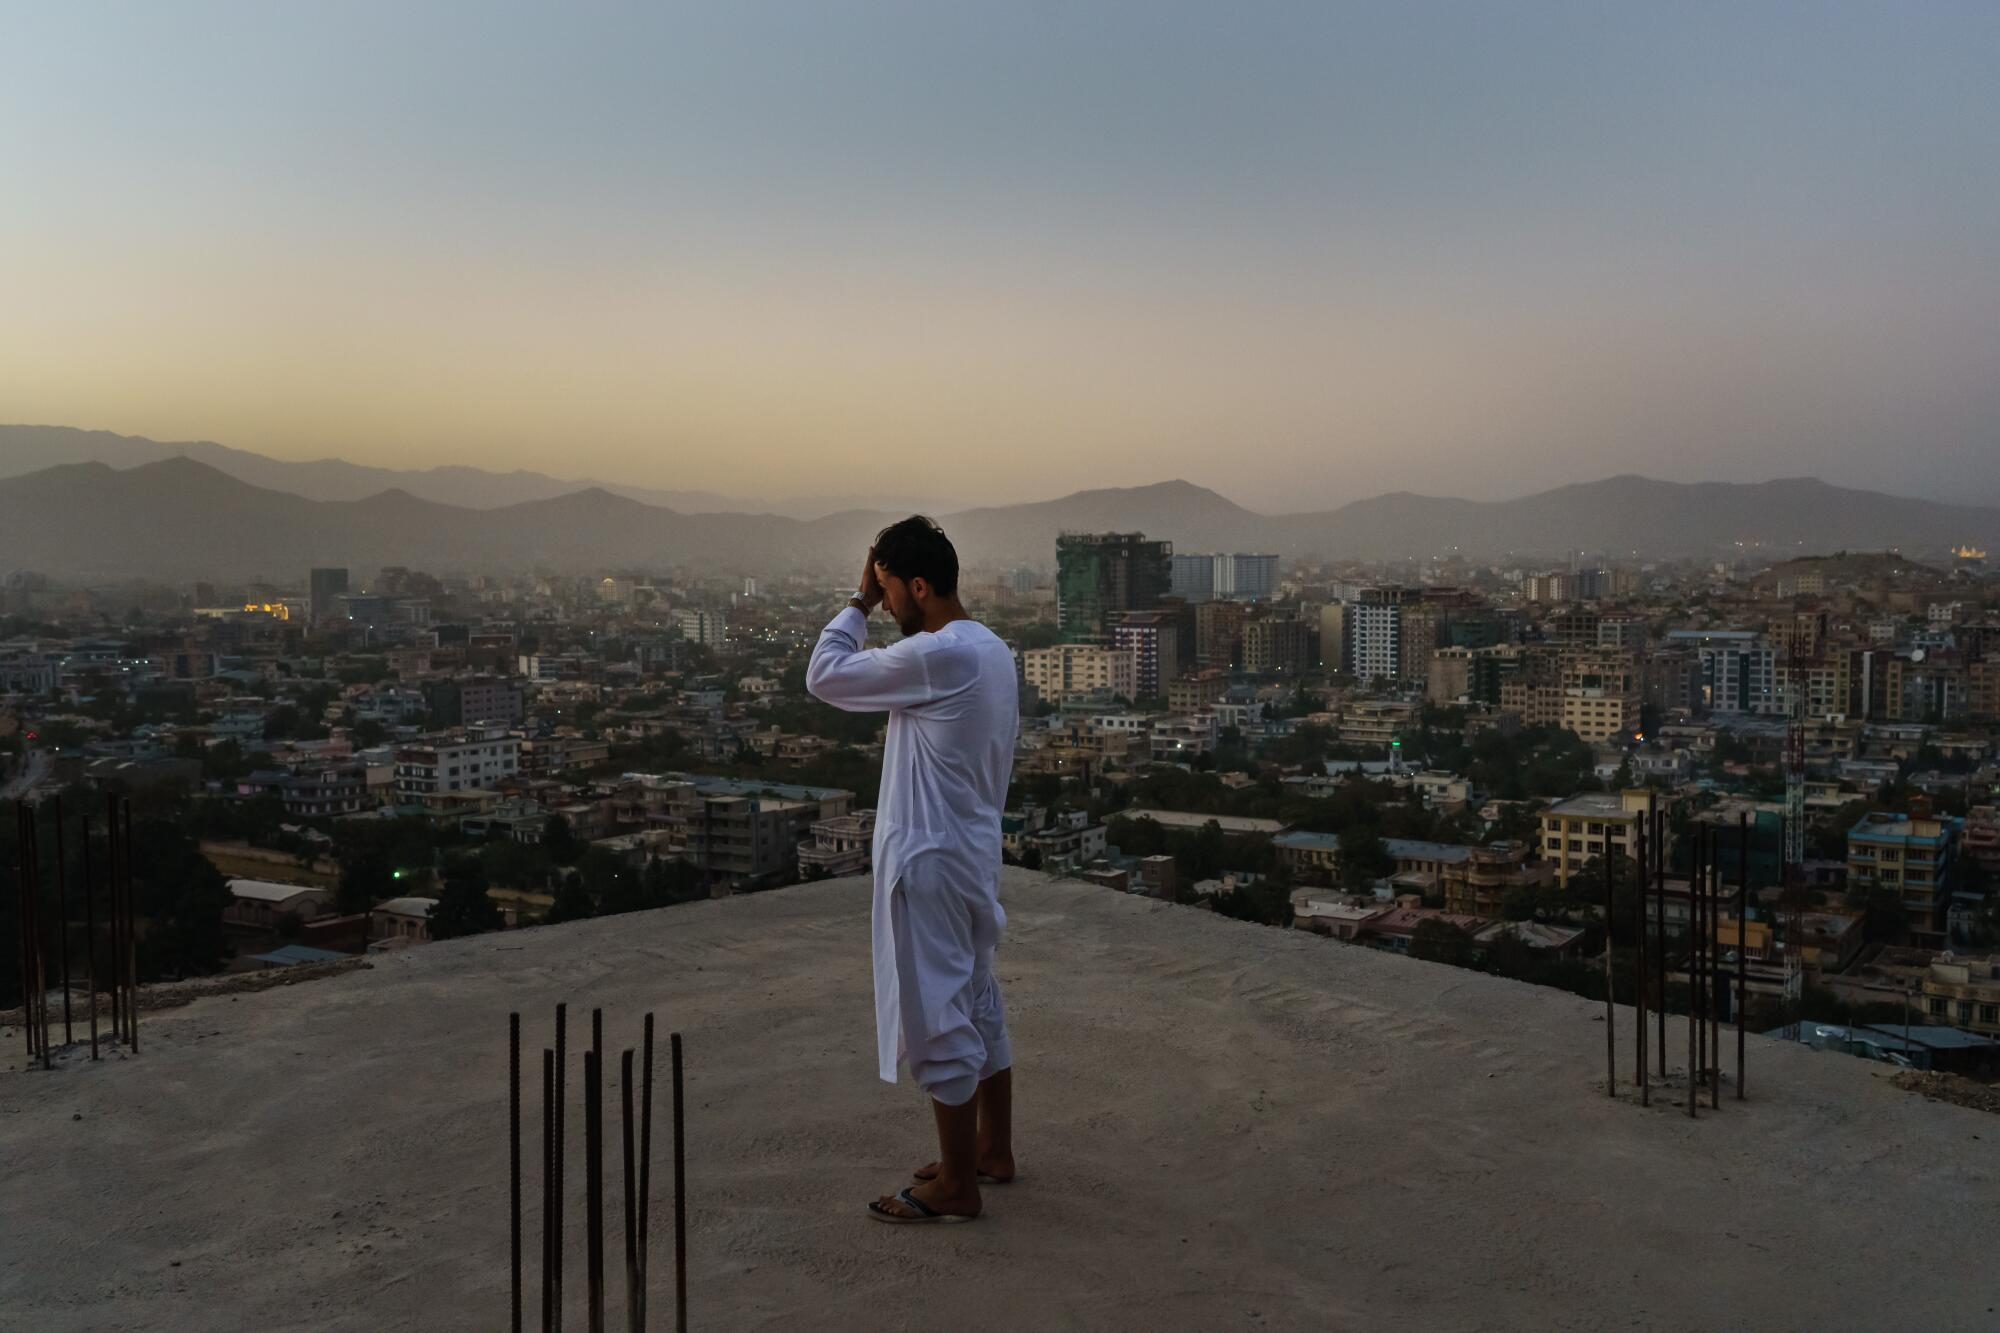 A person stands on an unfinished lot overlooking a city.